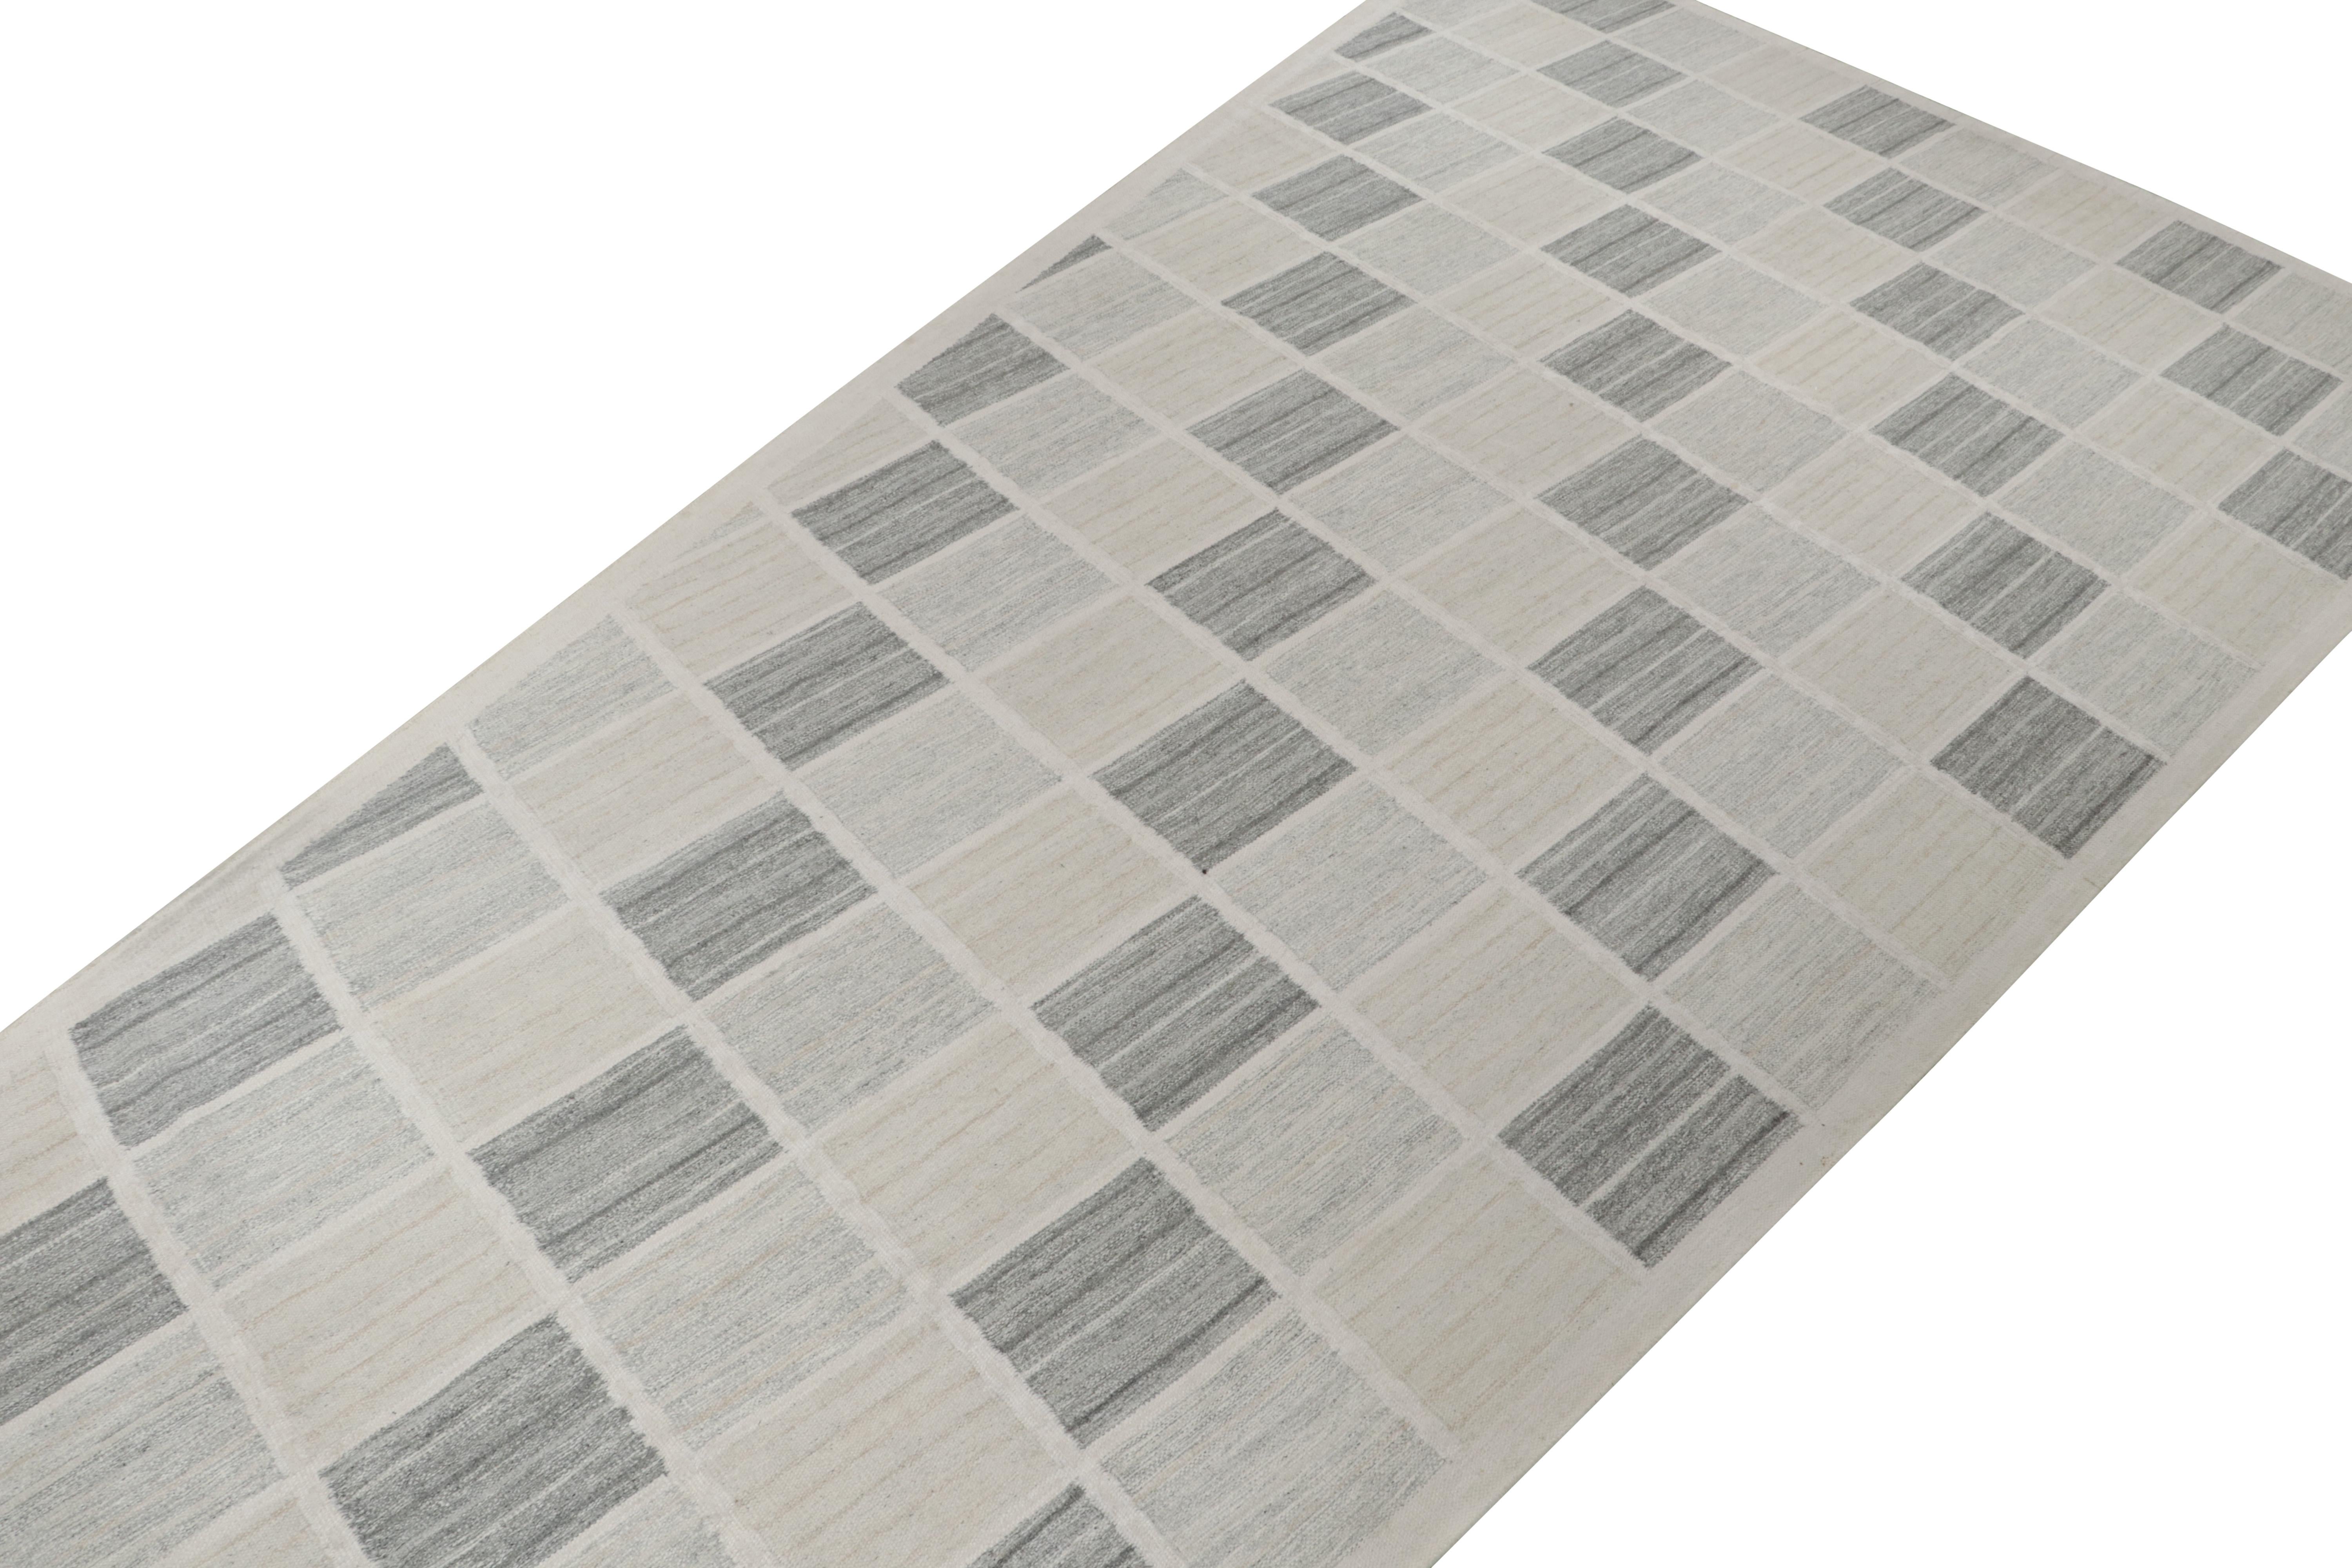 This 12x21 flat weave is a bold new addition to the Scandinavian Kilim collection by Rug & Kilim. Handwoven in wool, this trapezoid-shaped can be resized or cut to one or multiple smaller pieces upon request. 

Design: 

This irregular-shaped Kilim